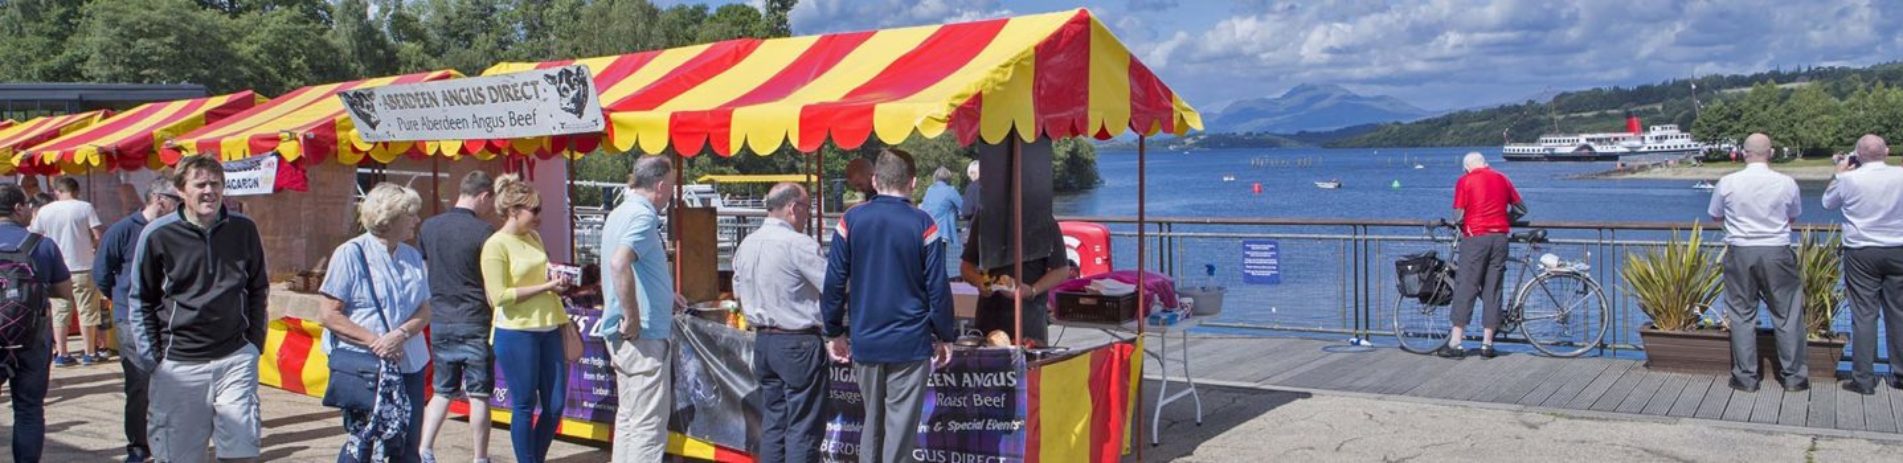 people-looking-at-food-at-red-and-yellow-stalls-at-the-edge-of-loch-lomond-in-balloch-at-food-market